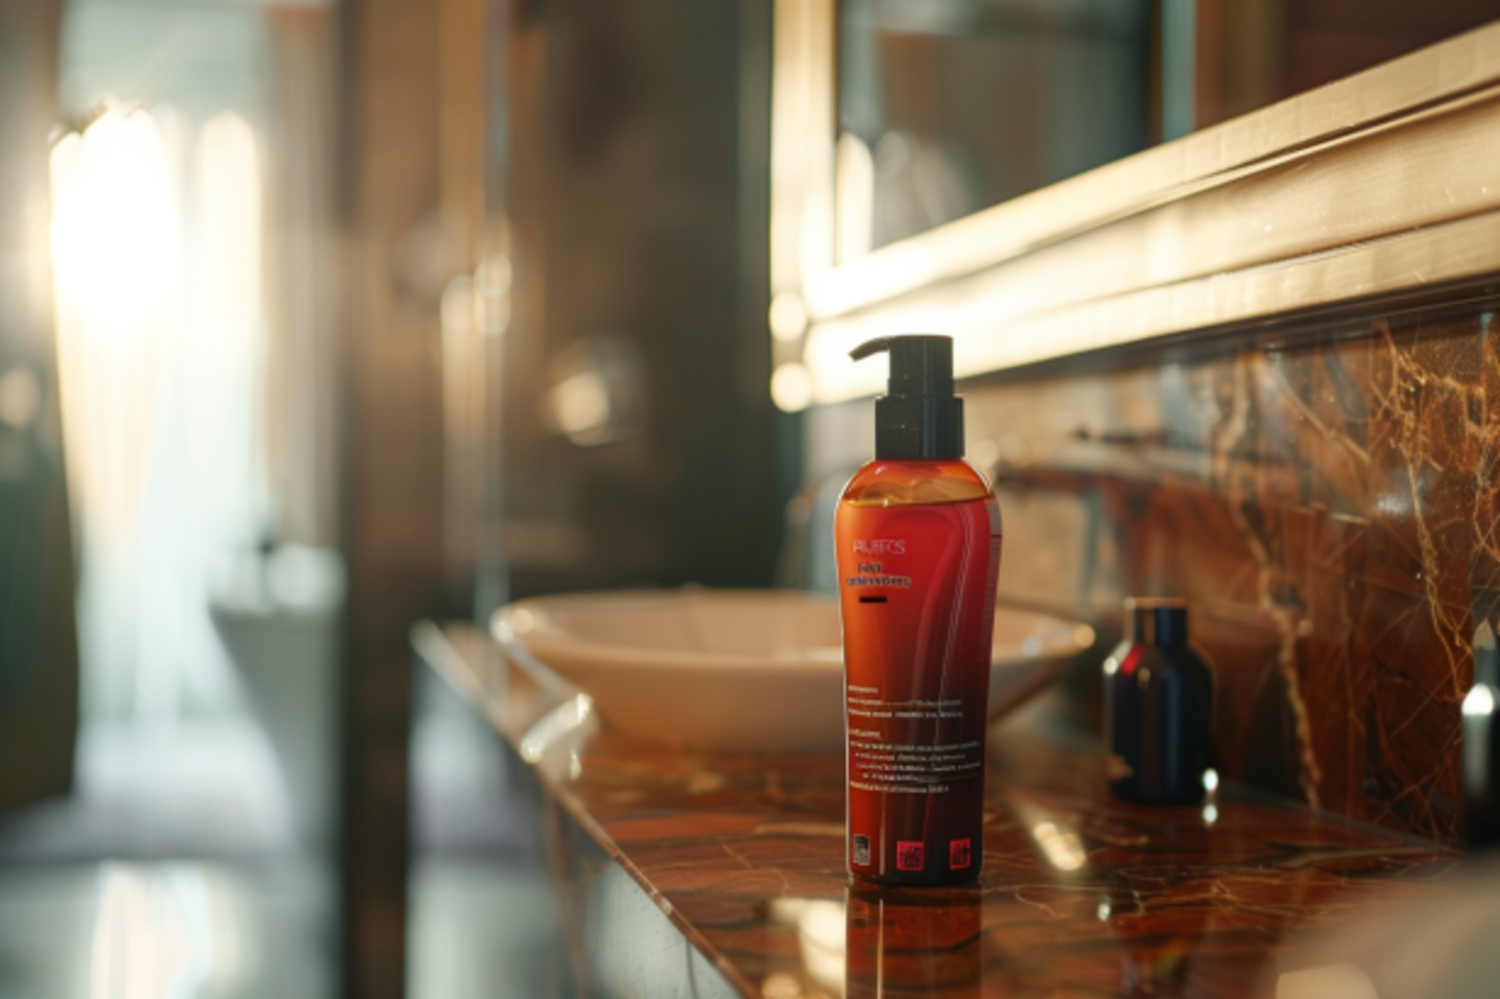 A bottle of haircare product in the bathroom | Source: Midjourney